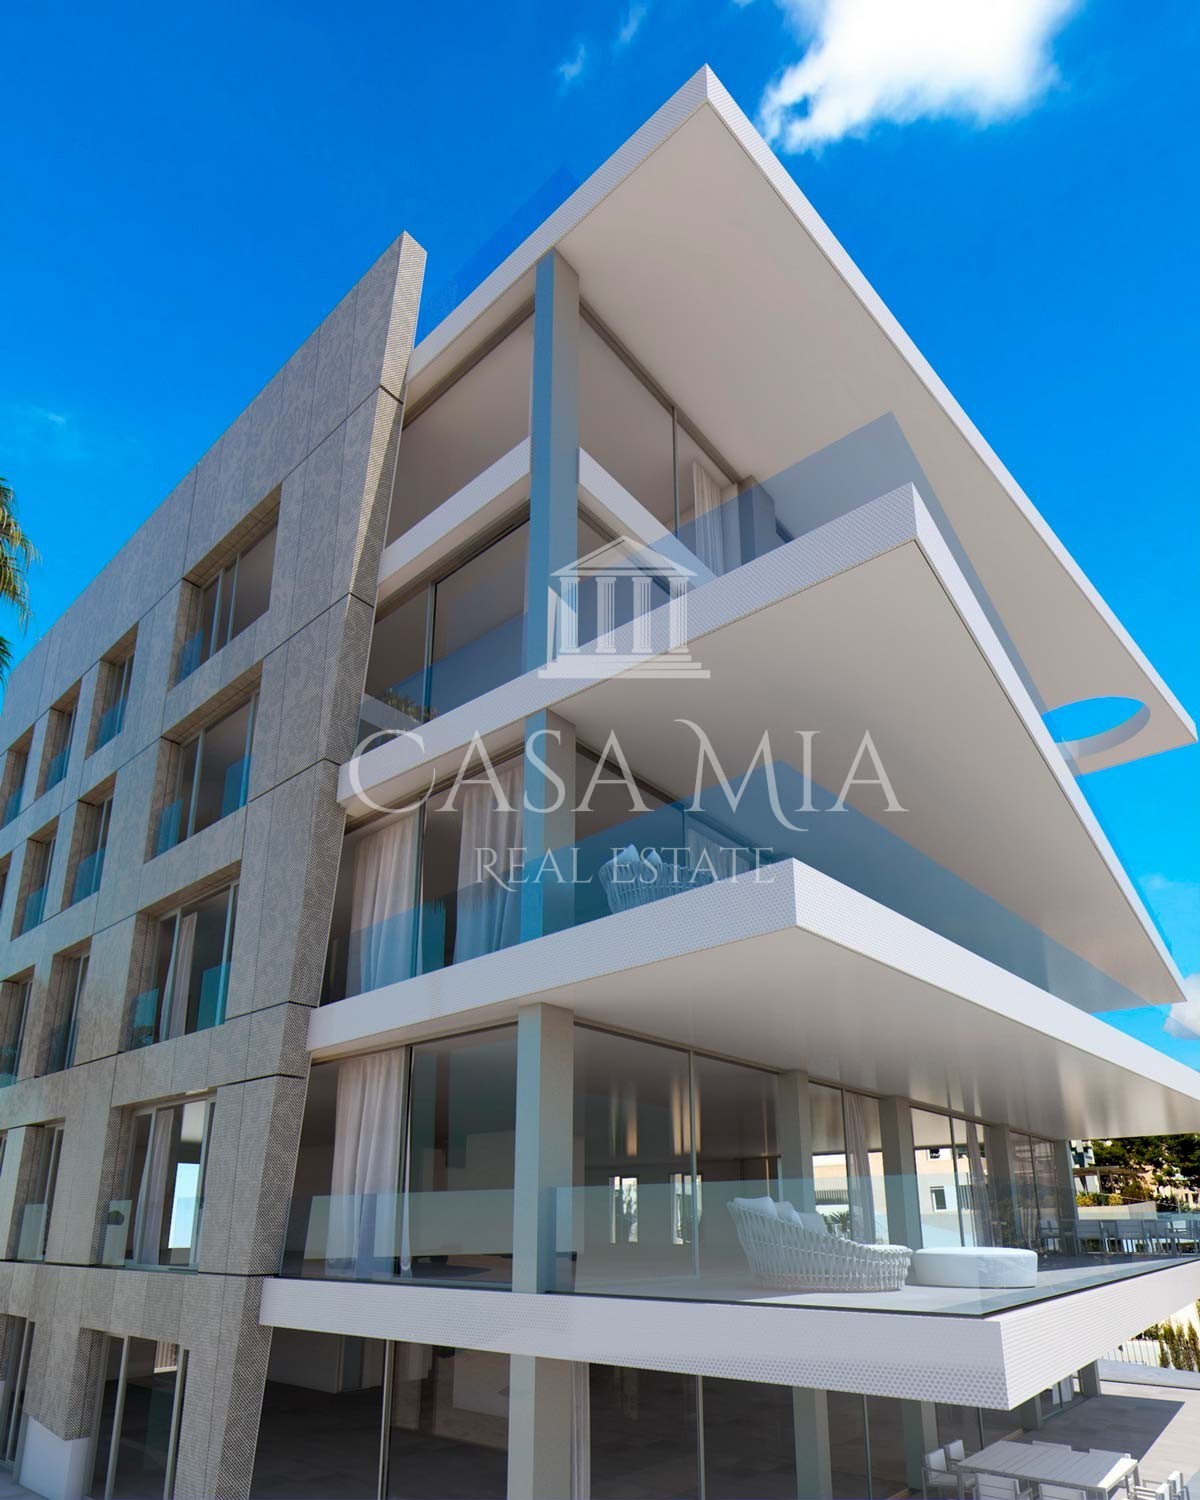 Spectacular new construction dublex penthouse with private pool, Palma